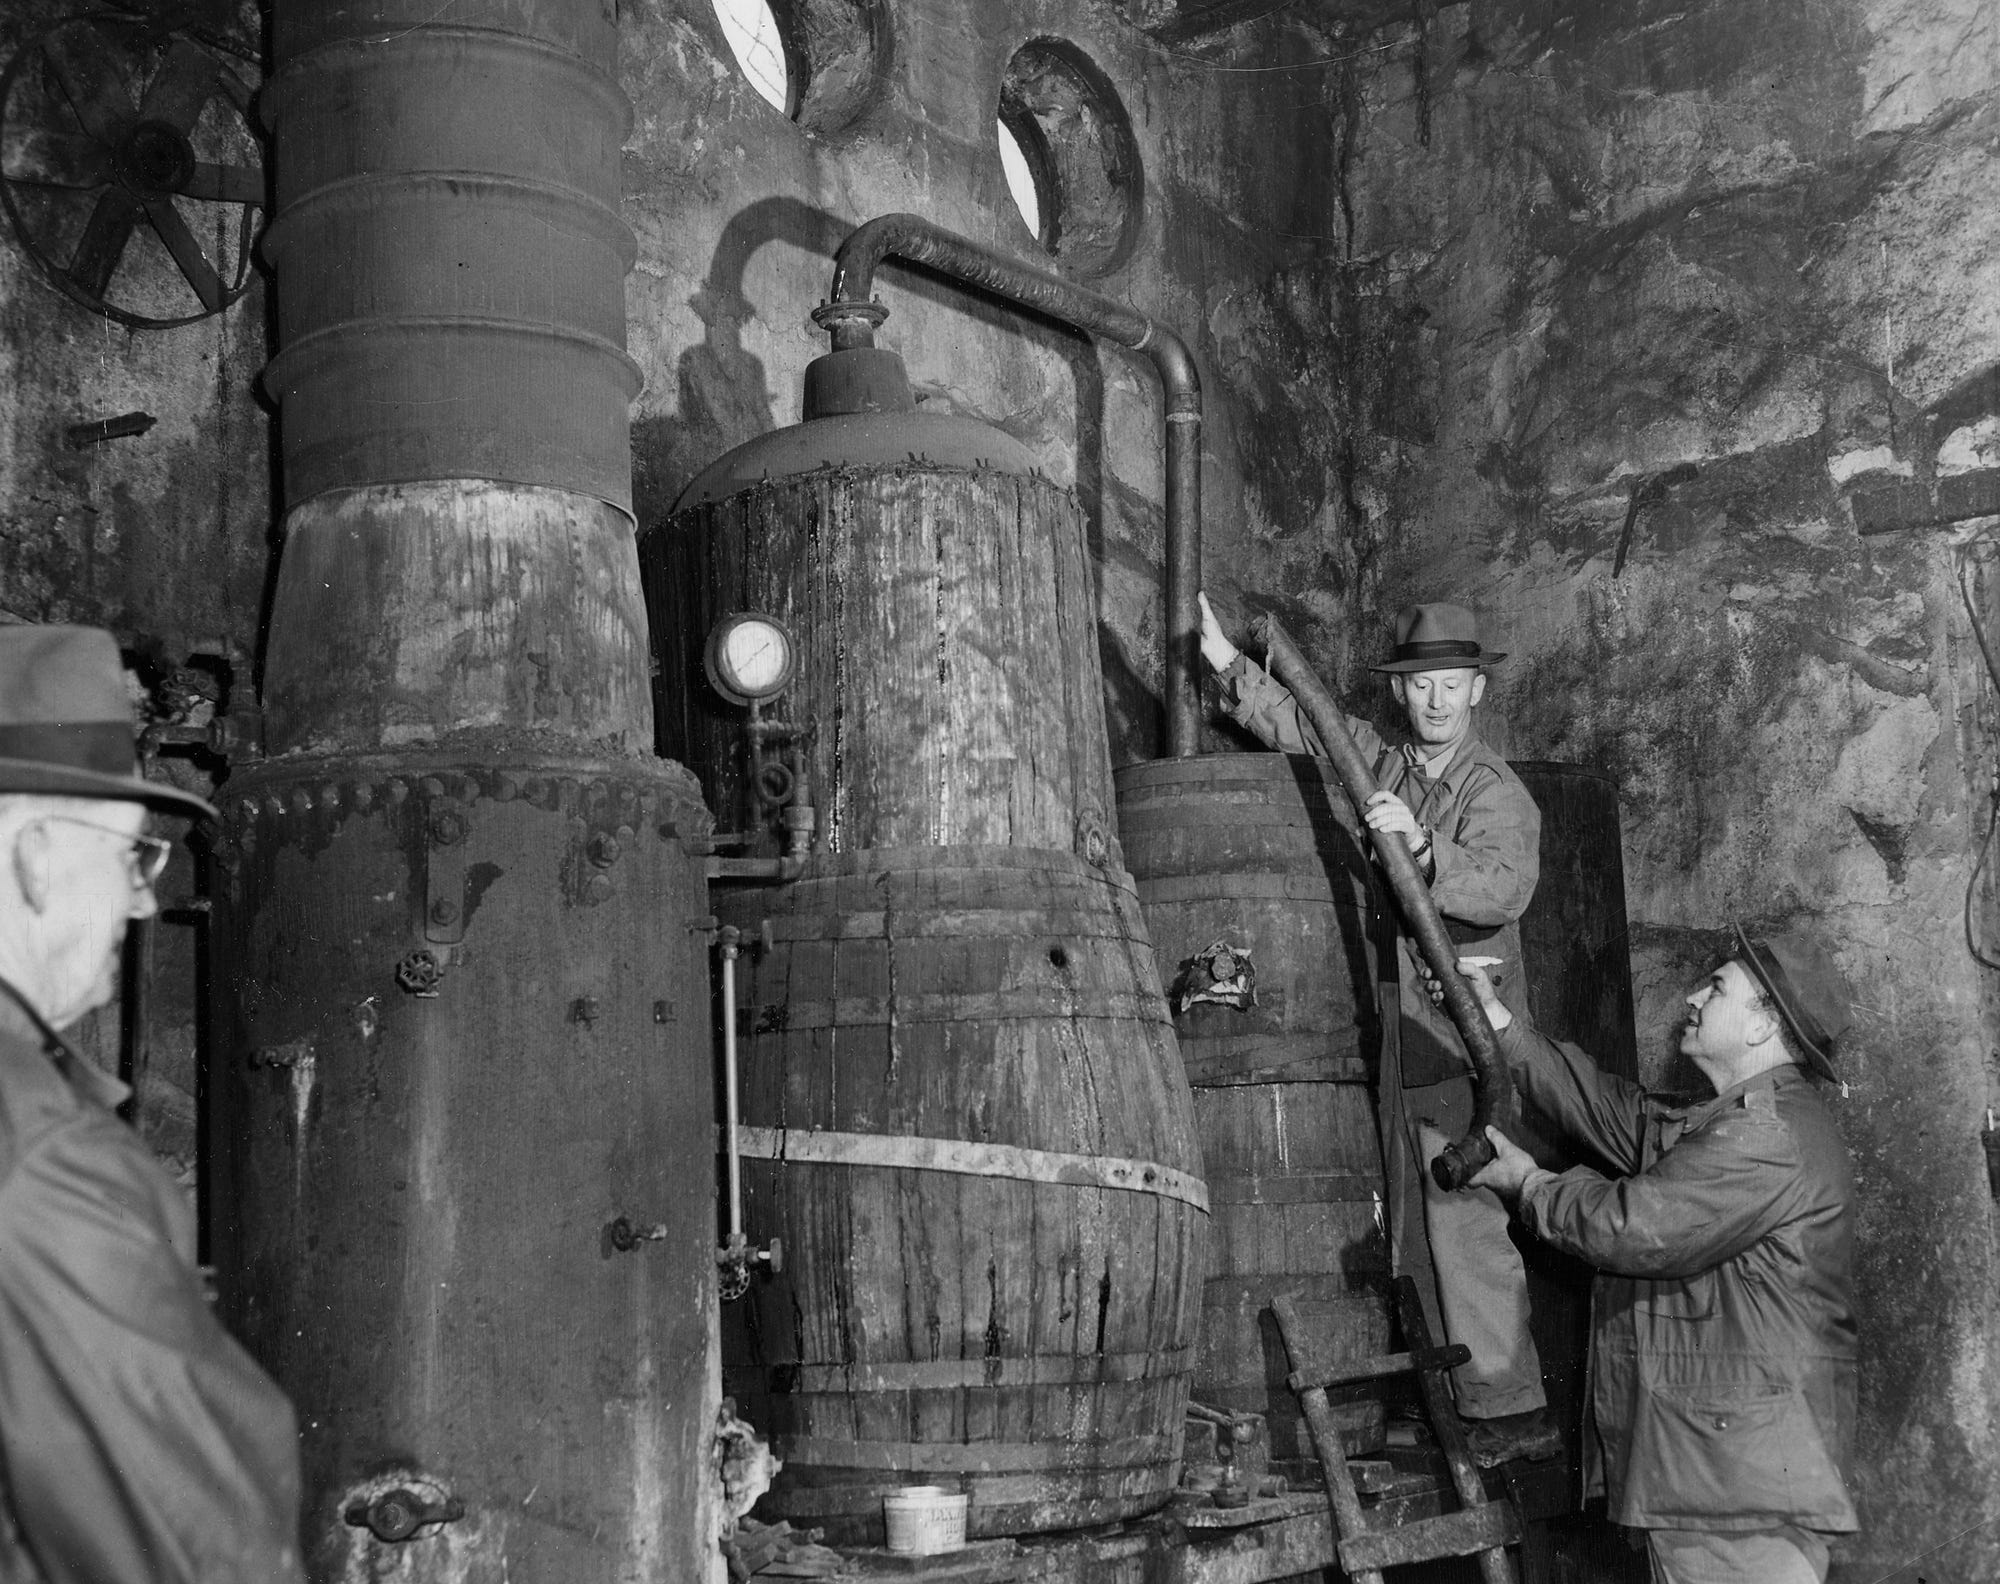 Dismantling a 300-gallon moonshine still found in a raid near Crestwood are Elmer C. Davis and Mark Holmes, agents of the Federal Alcohol Tax Unit. At left is a steam boiler, and in center is the actual still. March 4, 1951